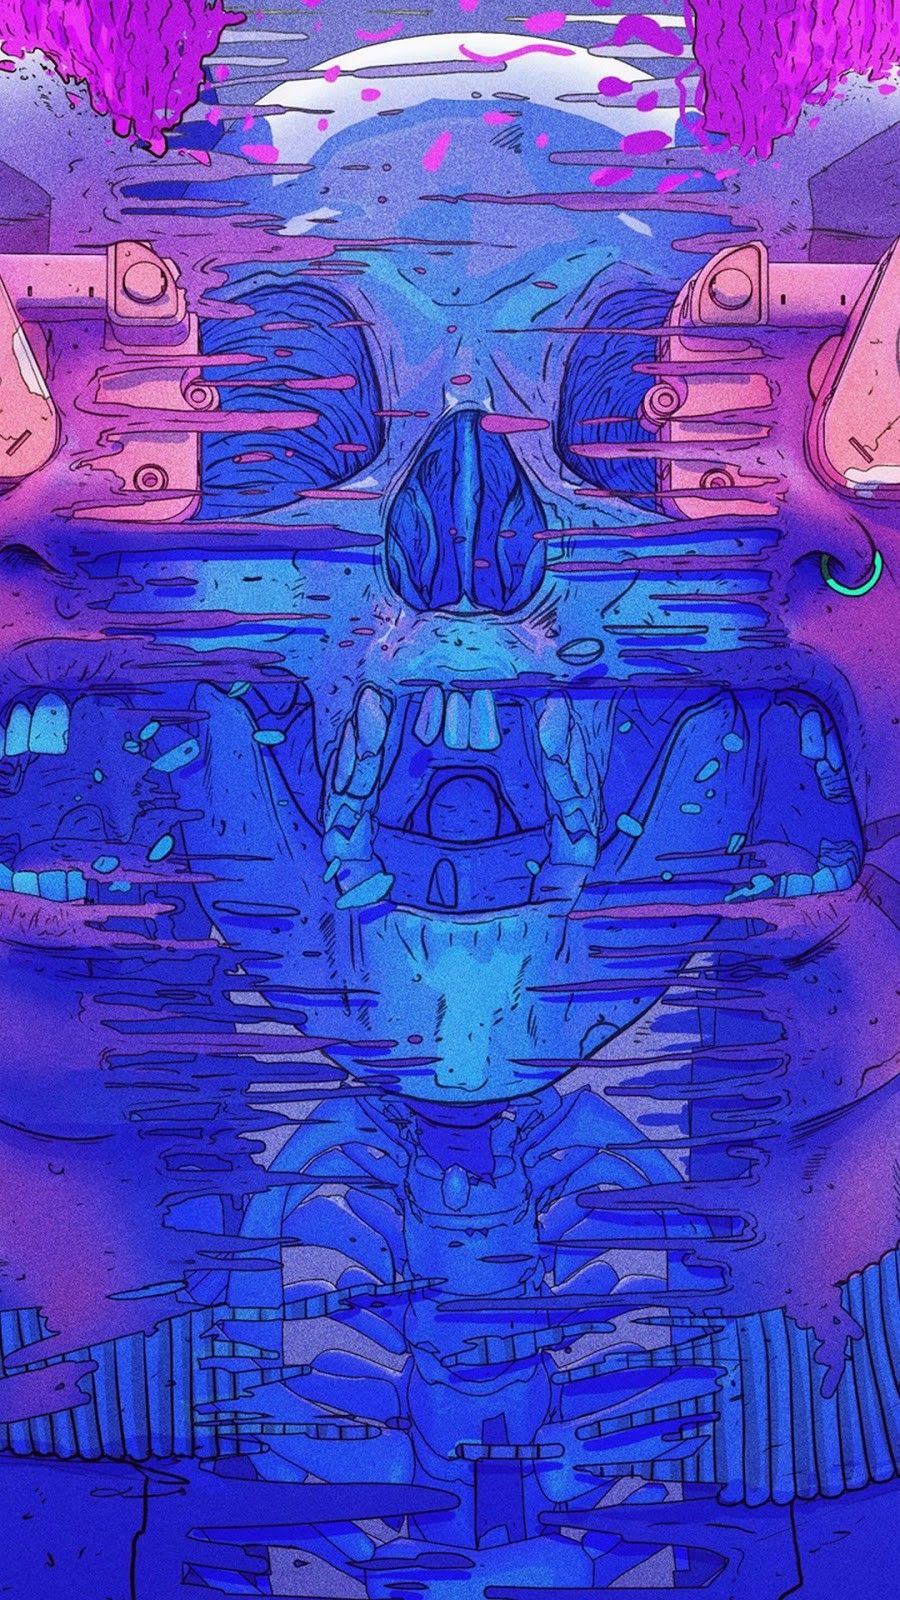 A digital artwork of an abstract skull with pink and purple colors - Science